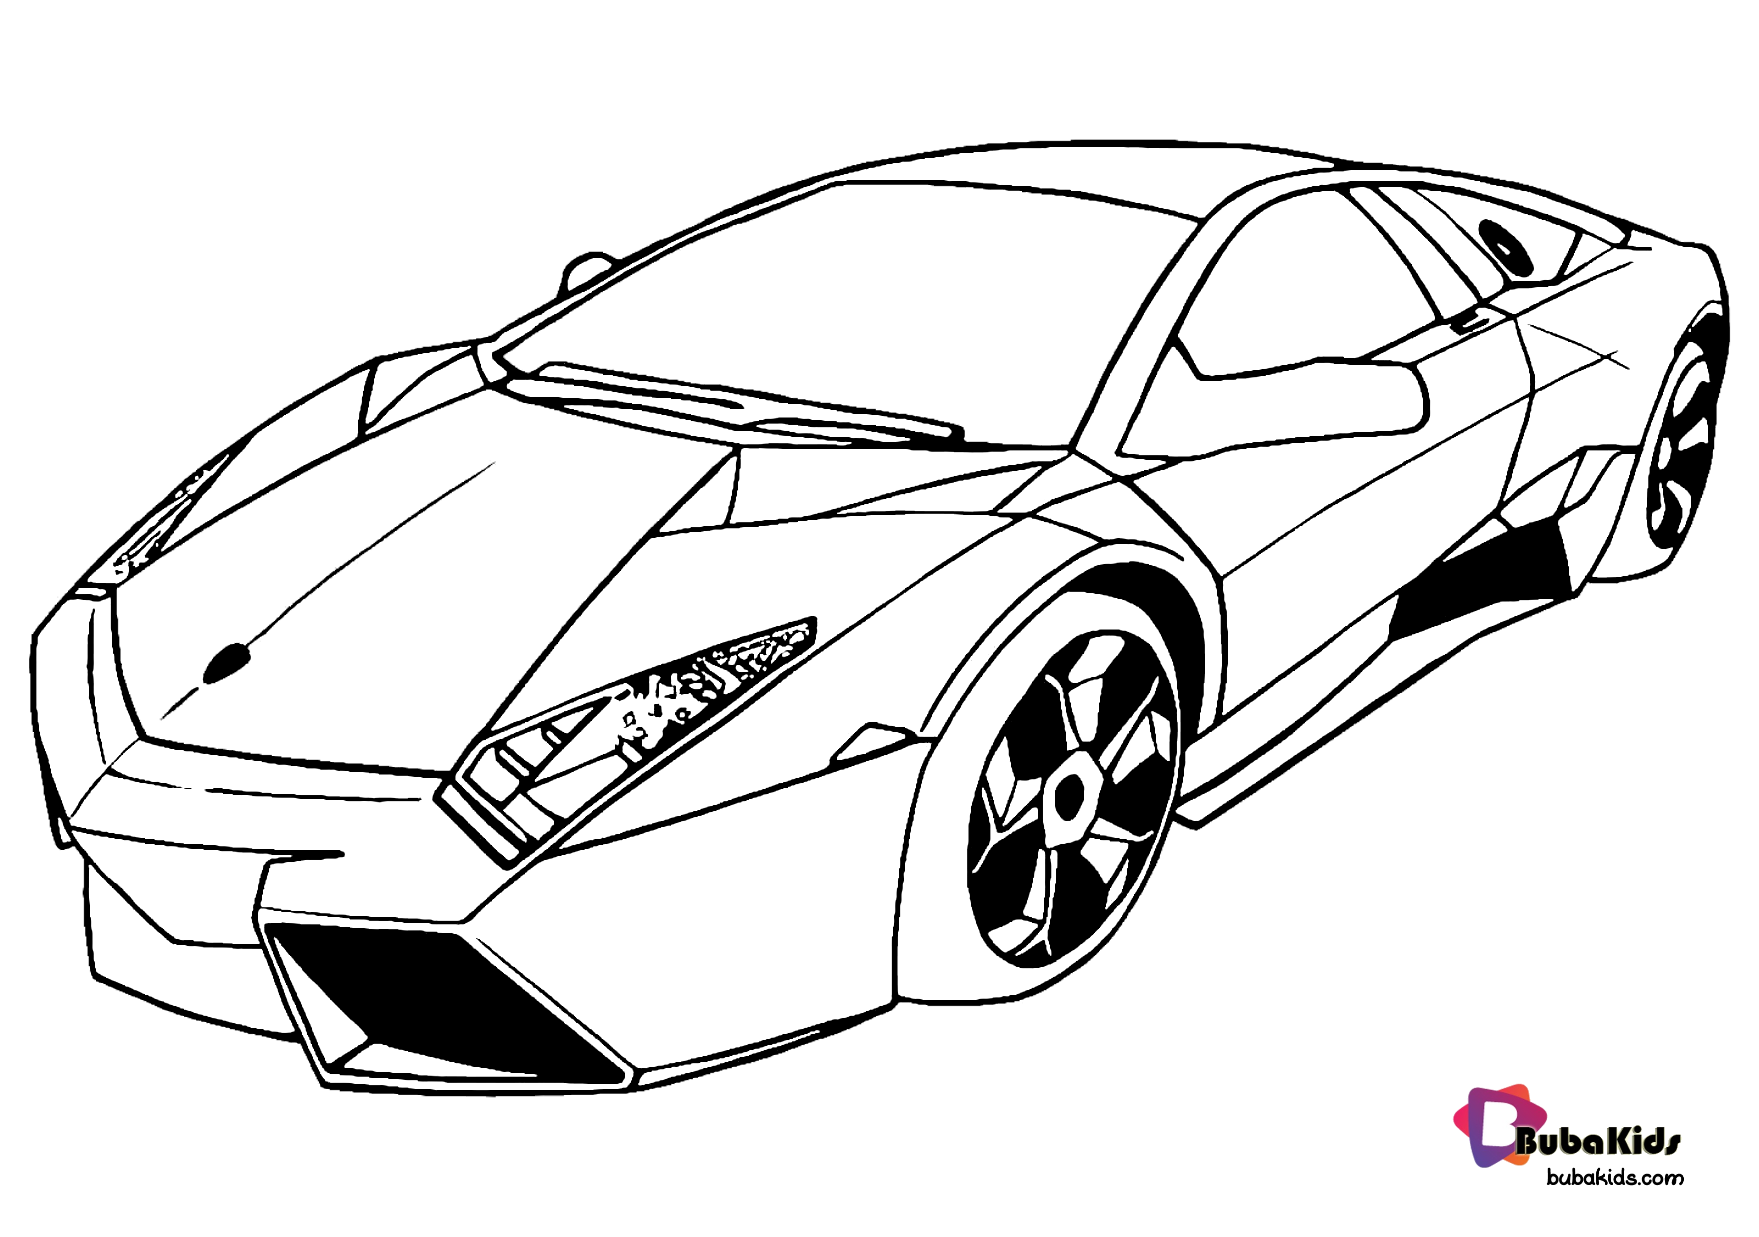 Free Download And Printable Super Car Coloring Page In 20 With ...